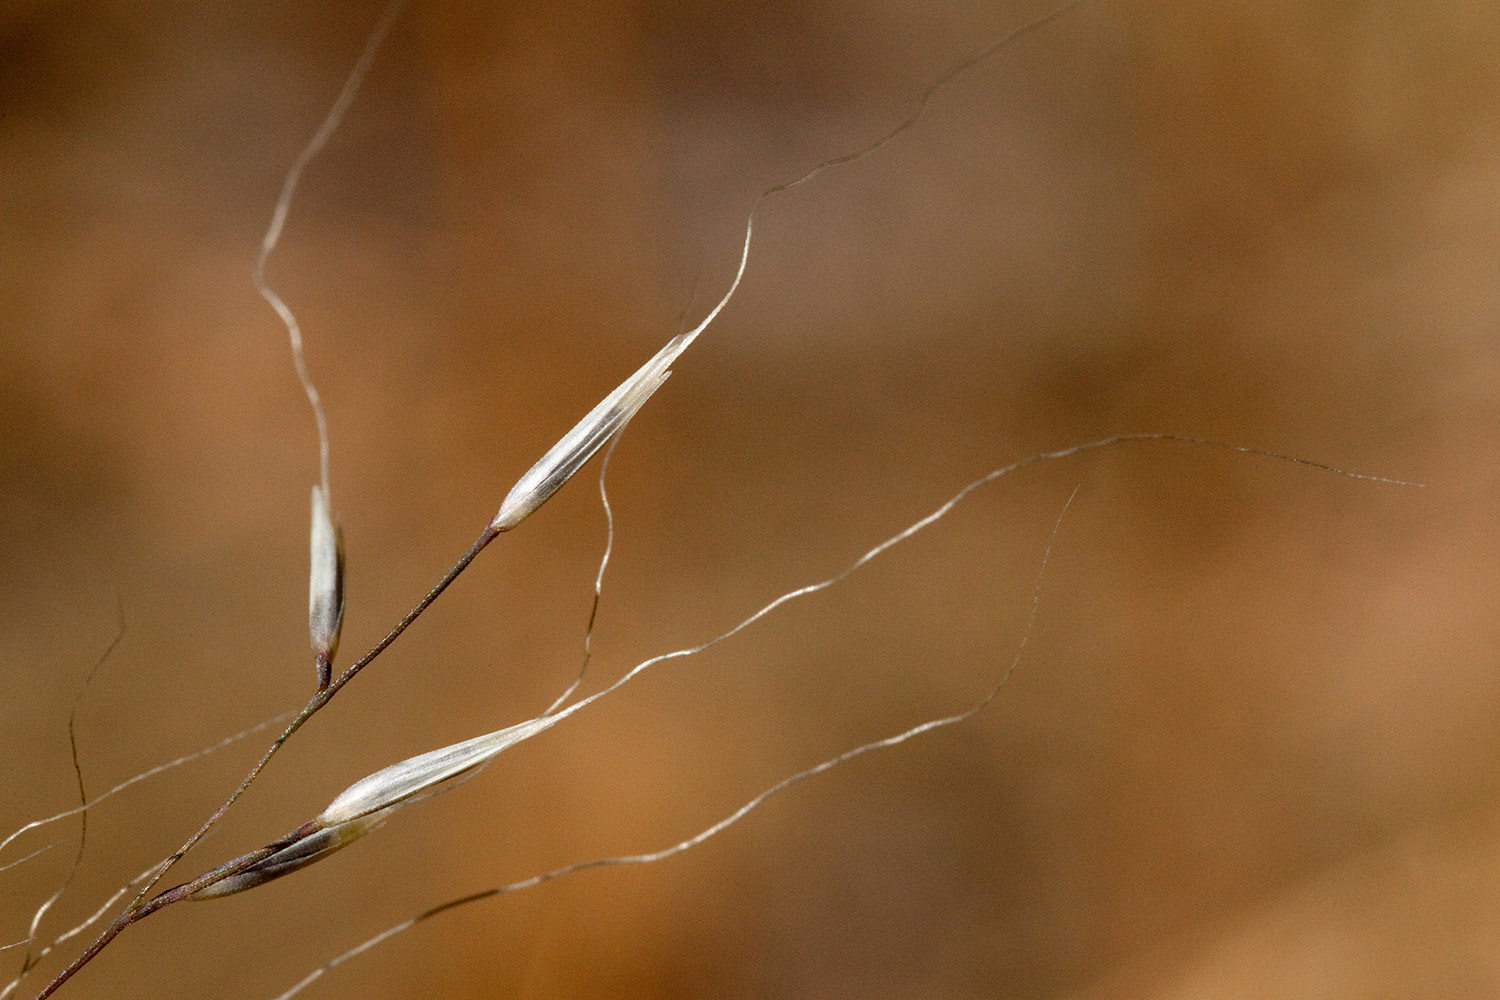 Close-up of seeds, which are very wispy with long awns